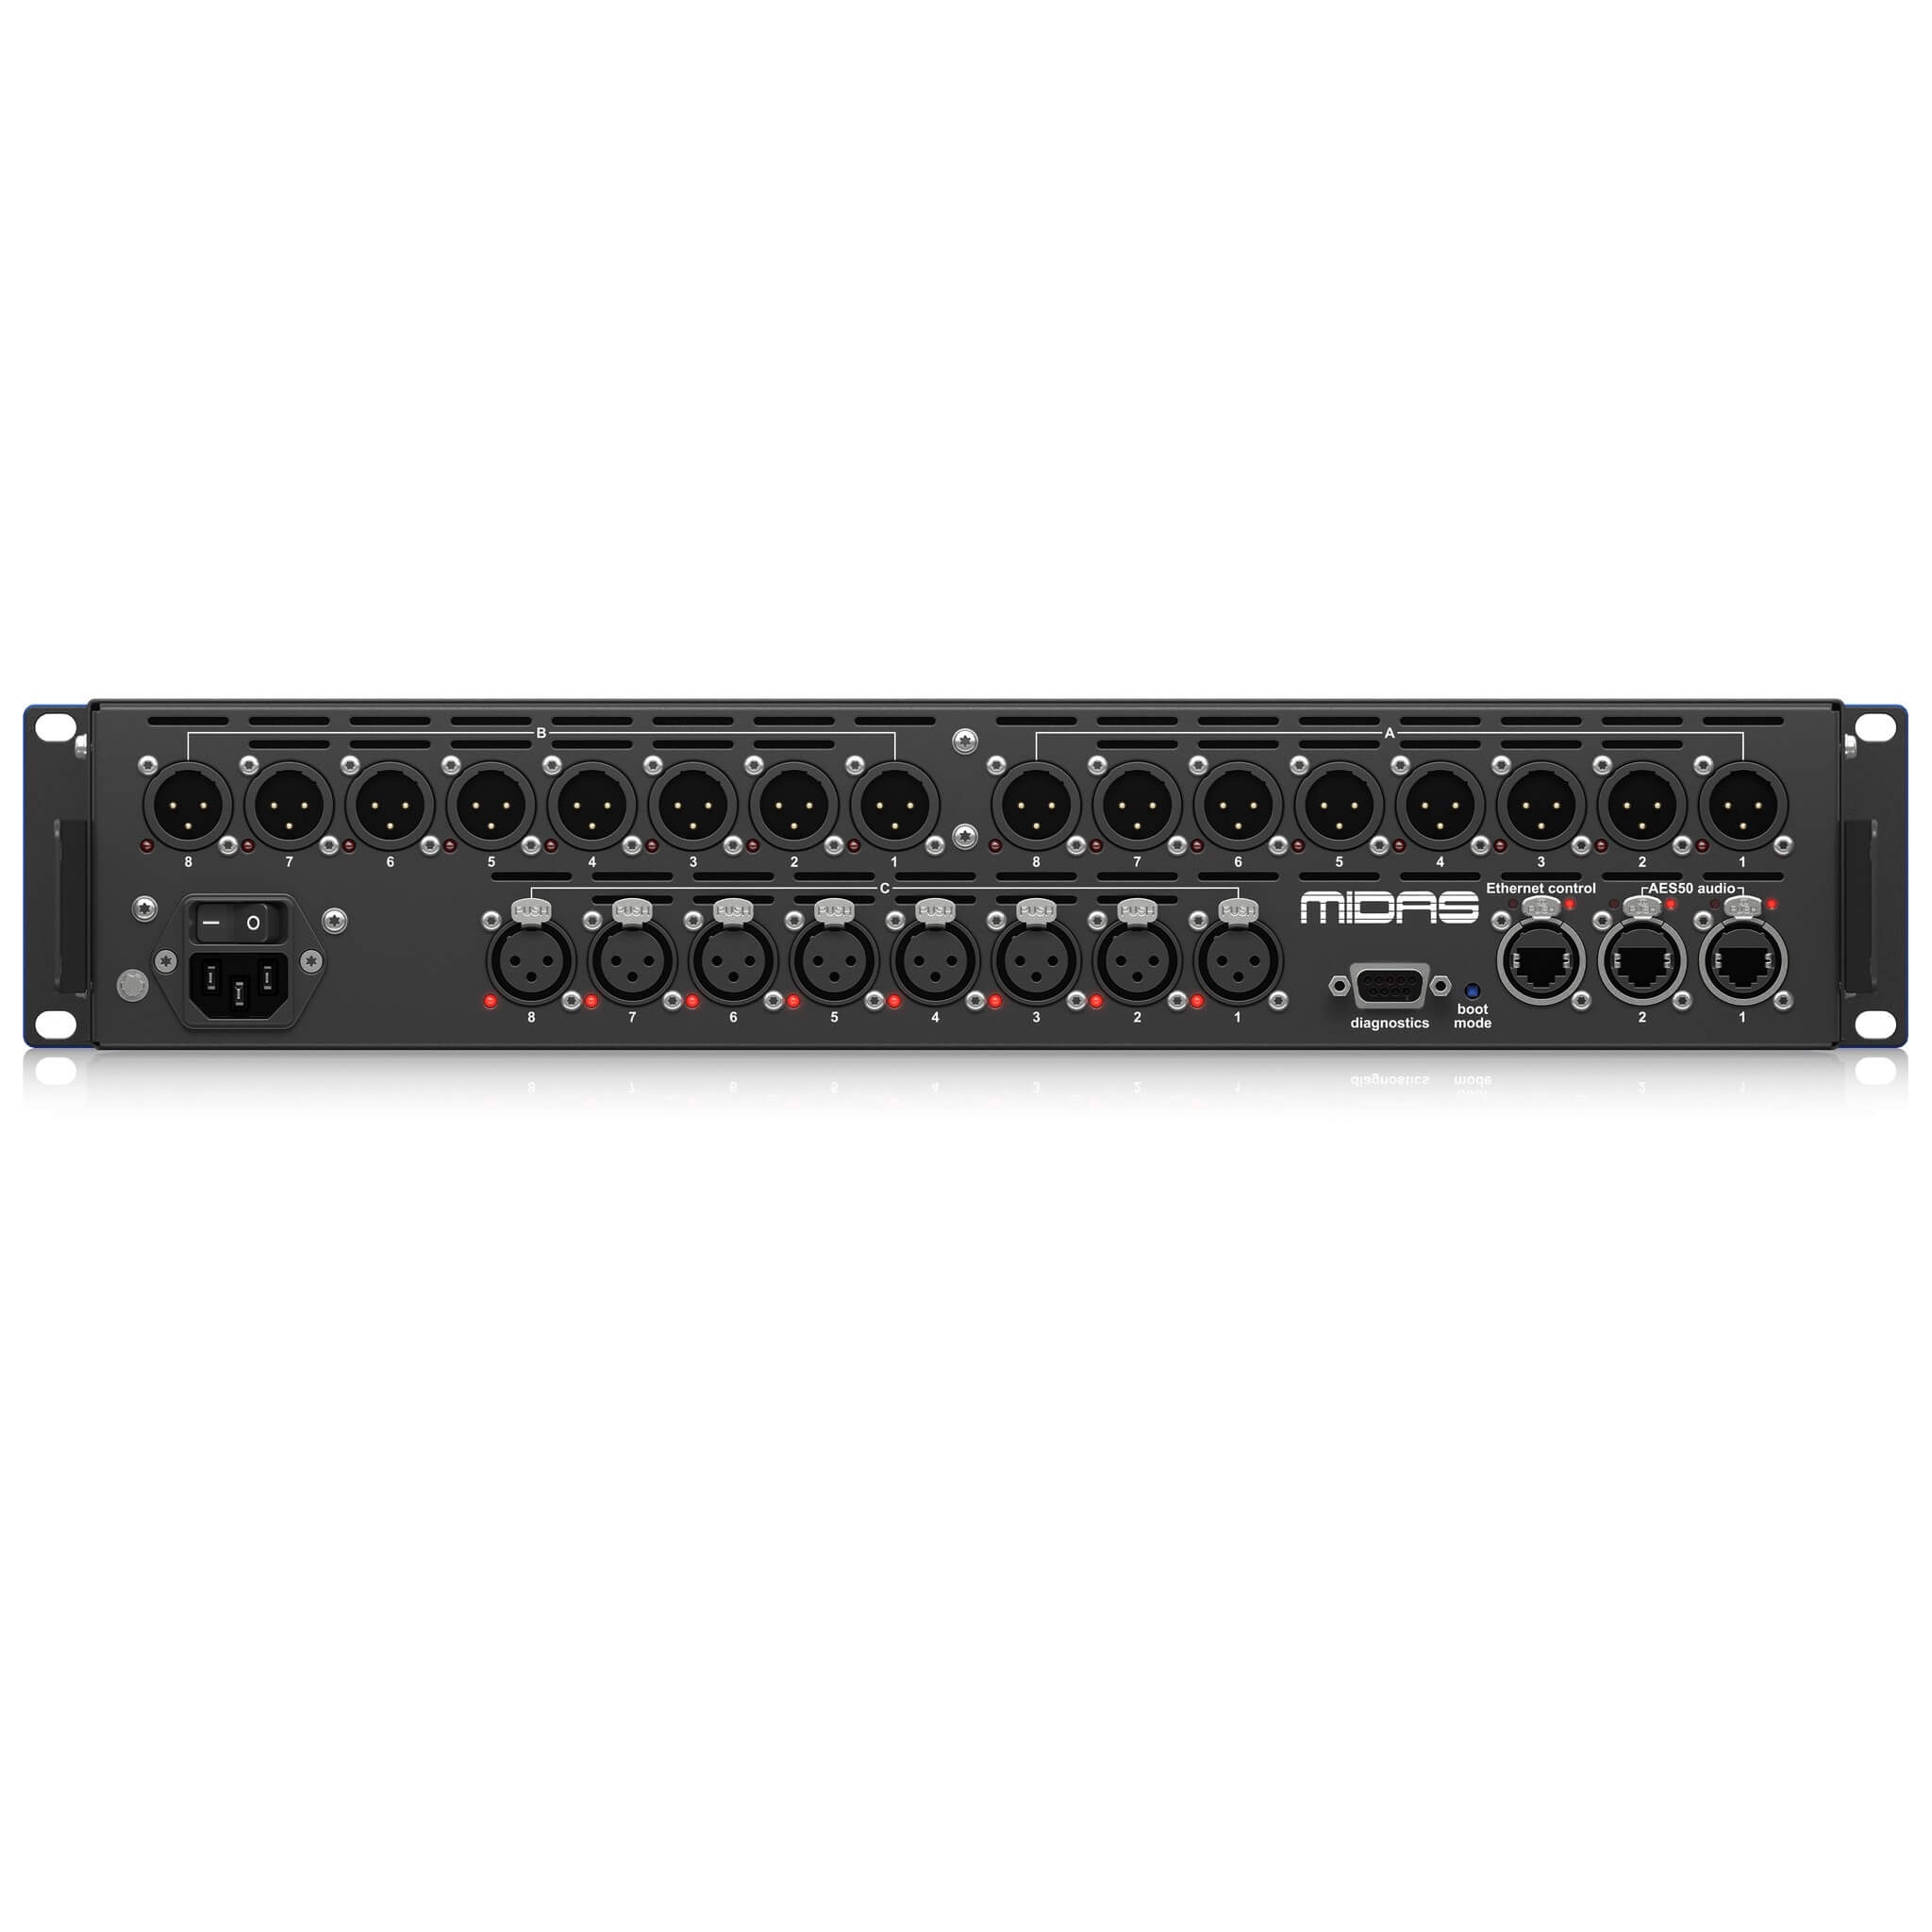 Midas DL154 - 8 Input, 16 Output Stage Box with 8 Midas Mic Preamps, rear